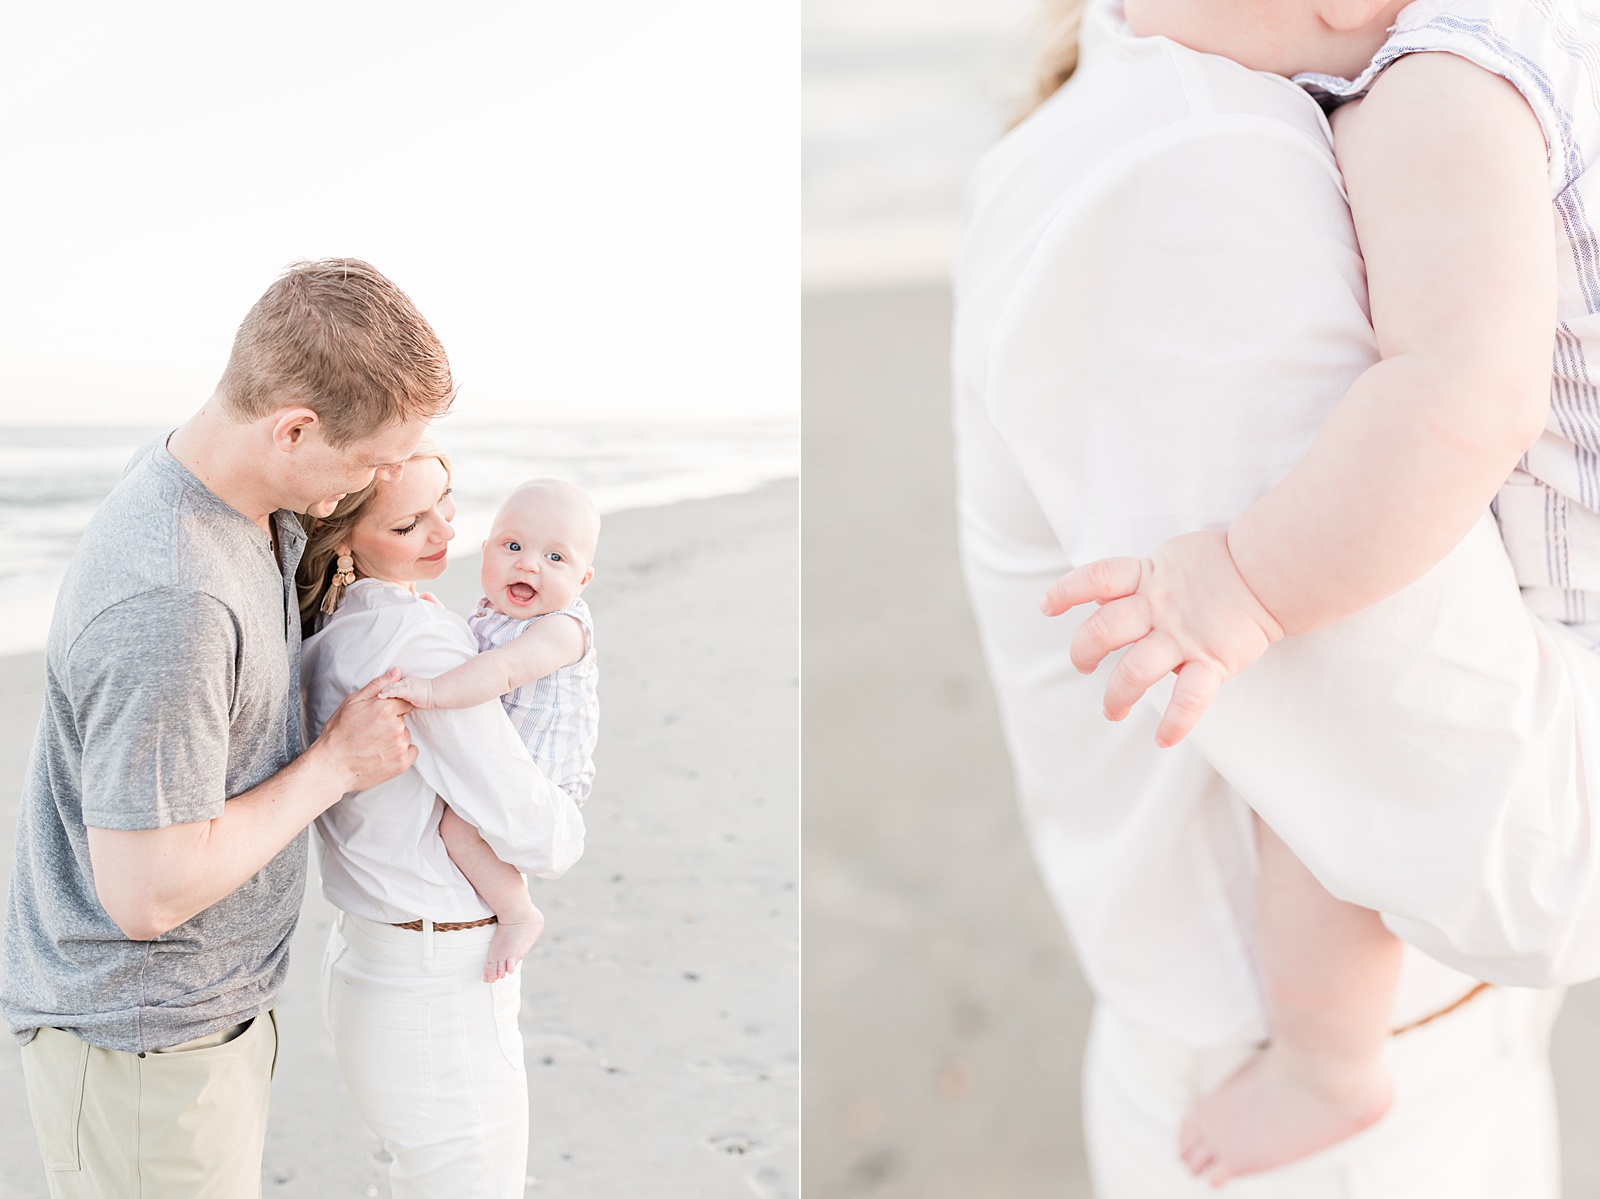 Baby with family on Isle of Palms beach | Caitlyn Motycka Photography